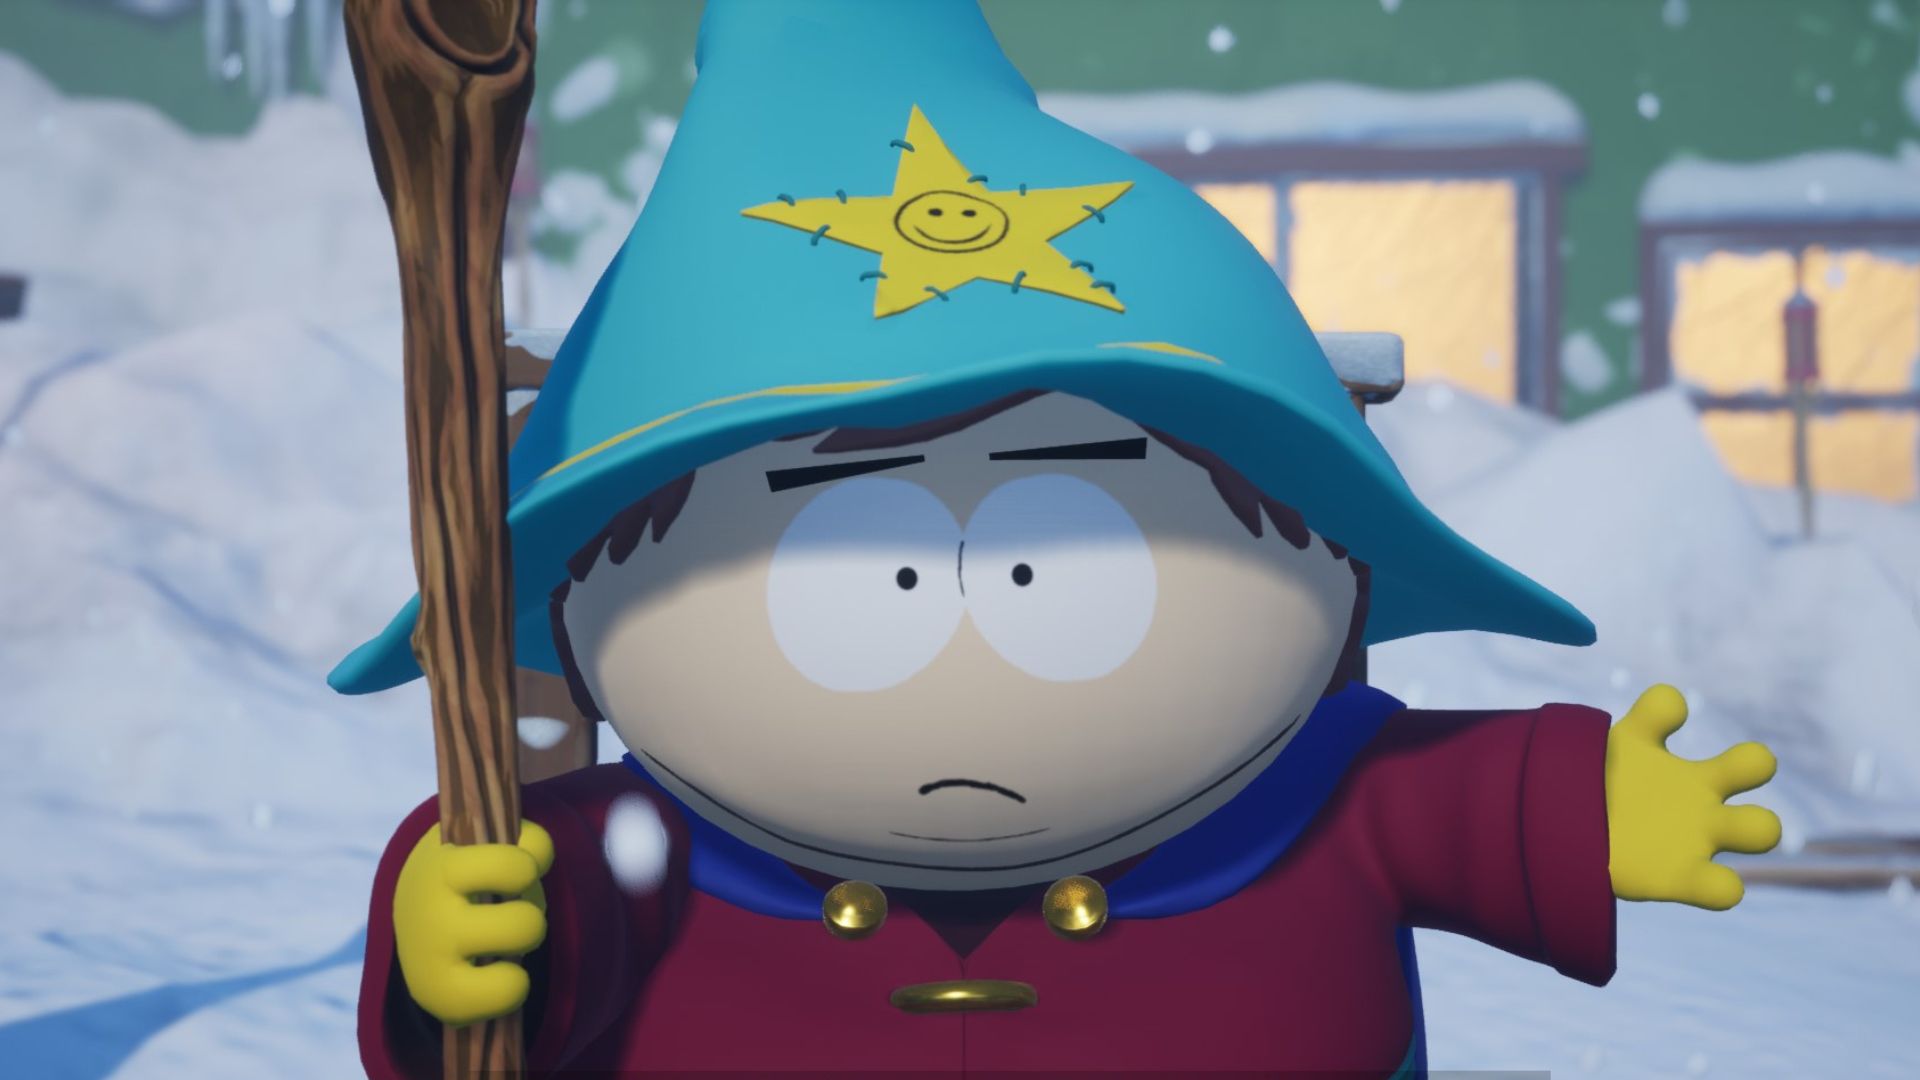 South Park Snow Day review – chaotic roguelike fun with friends